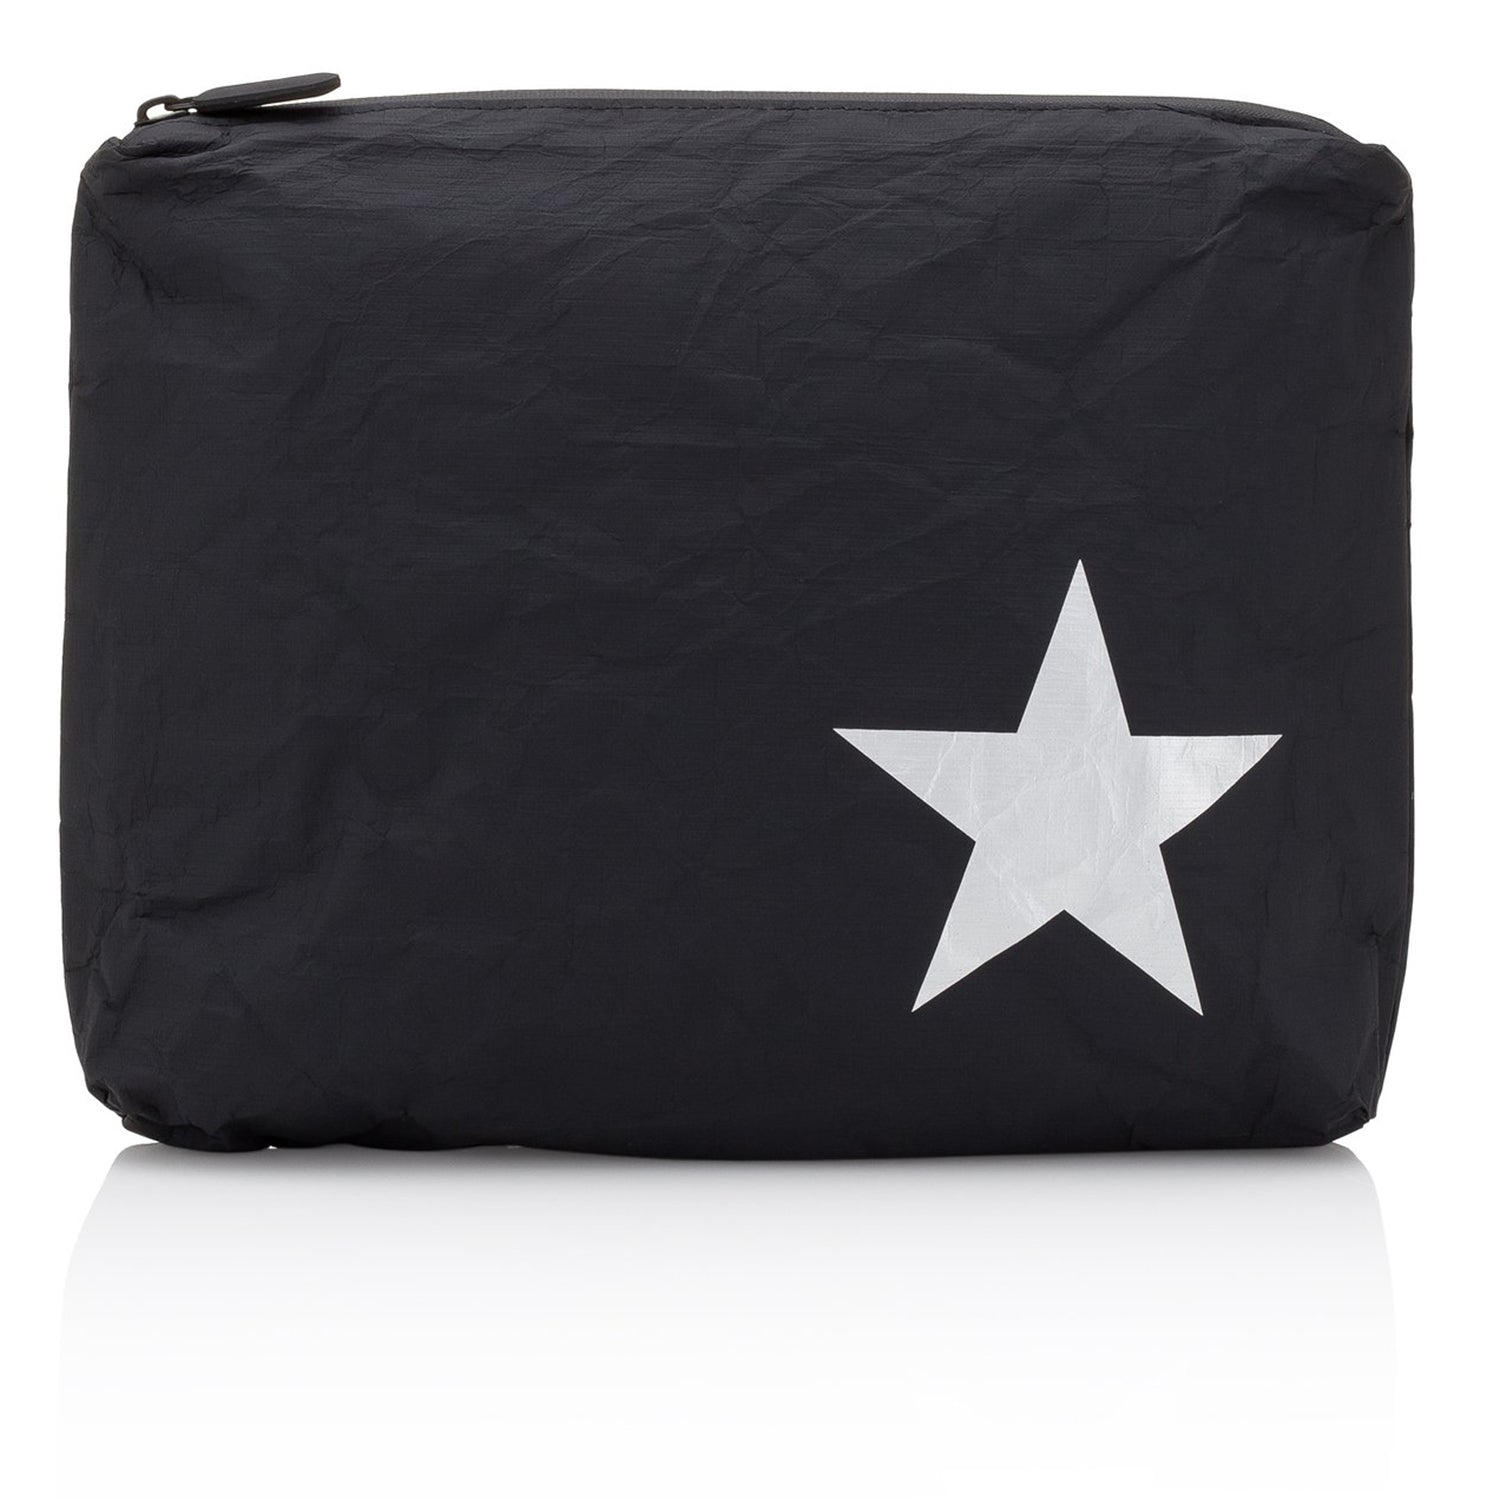 Makeup Pouch - Travel Pack - Medium Pack - Black with Metallic Silver Star